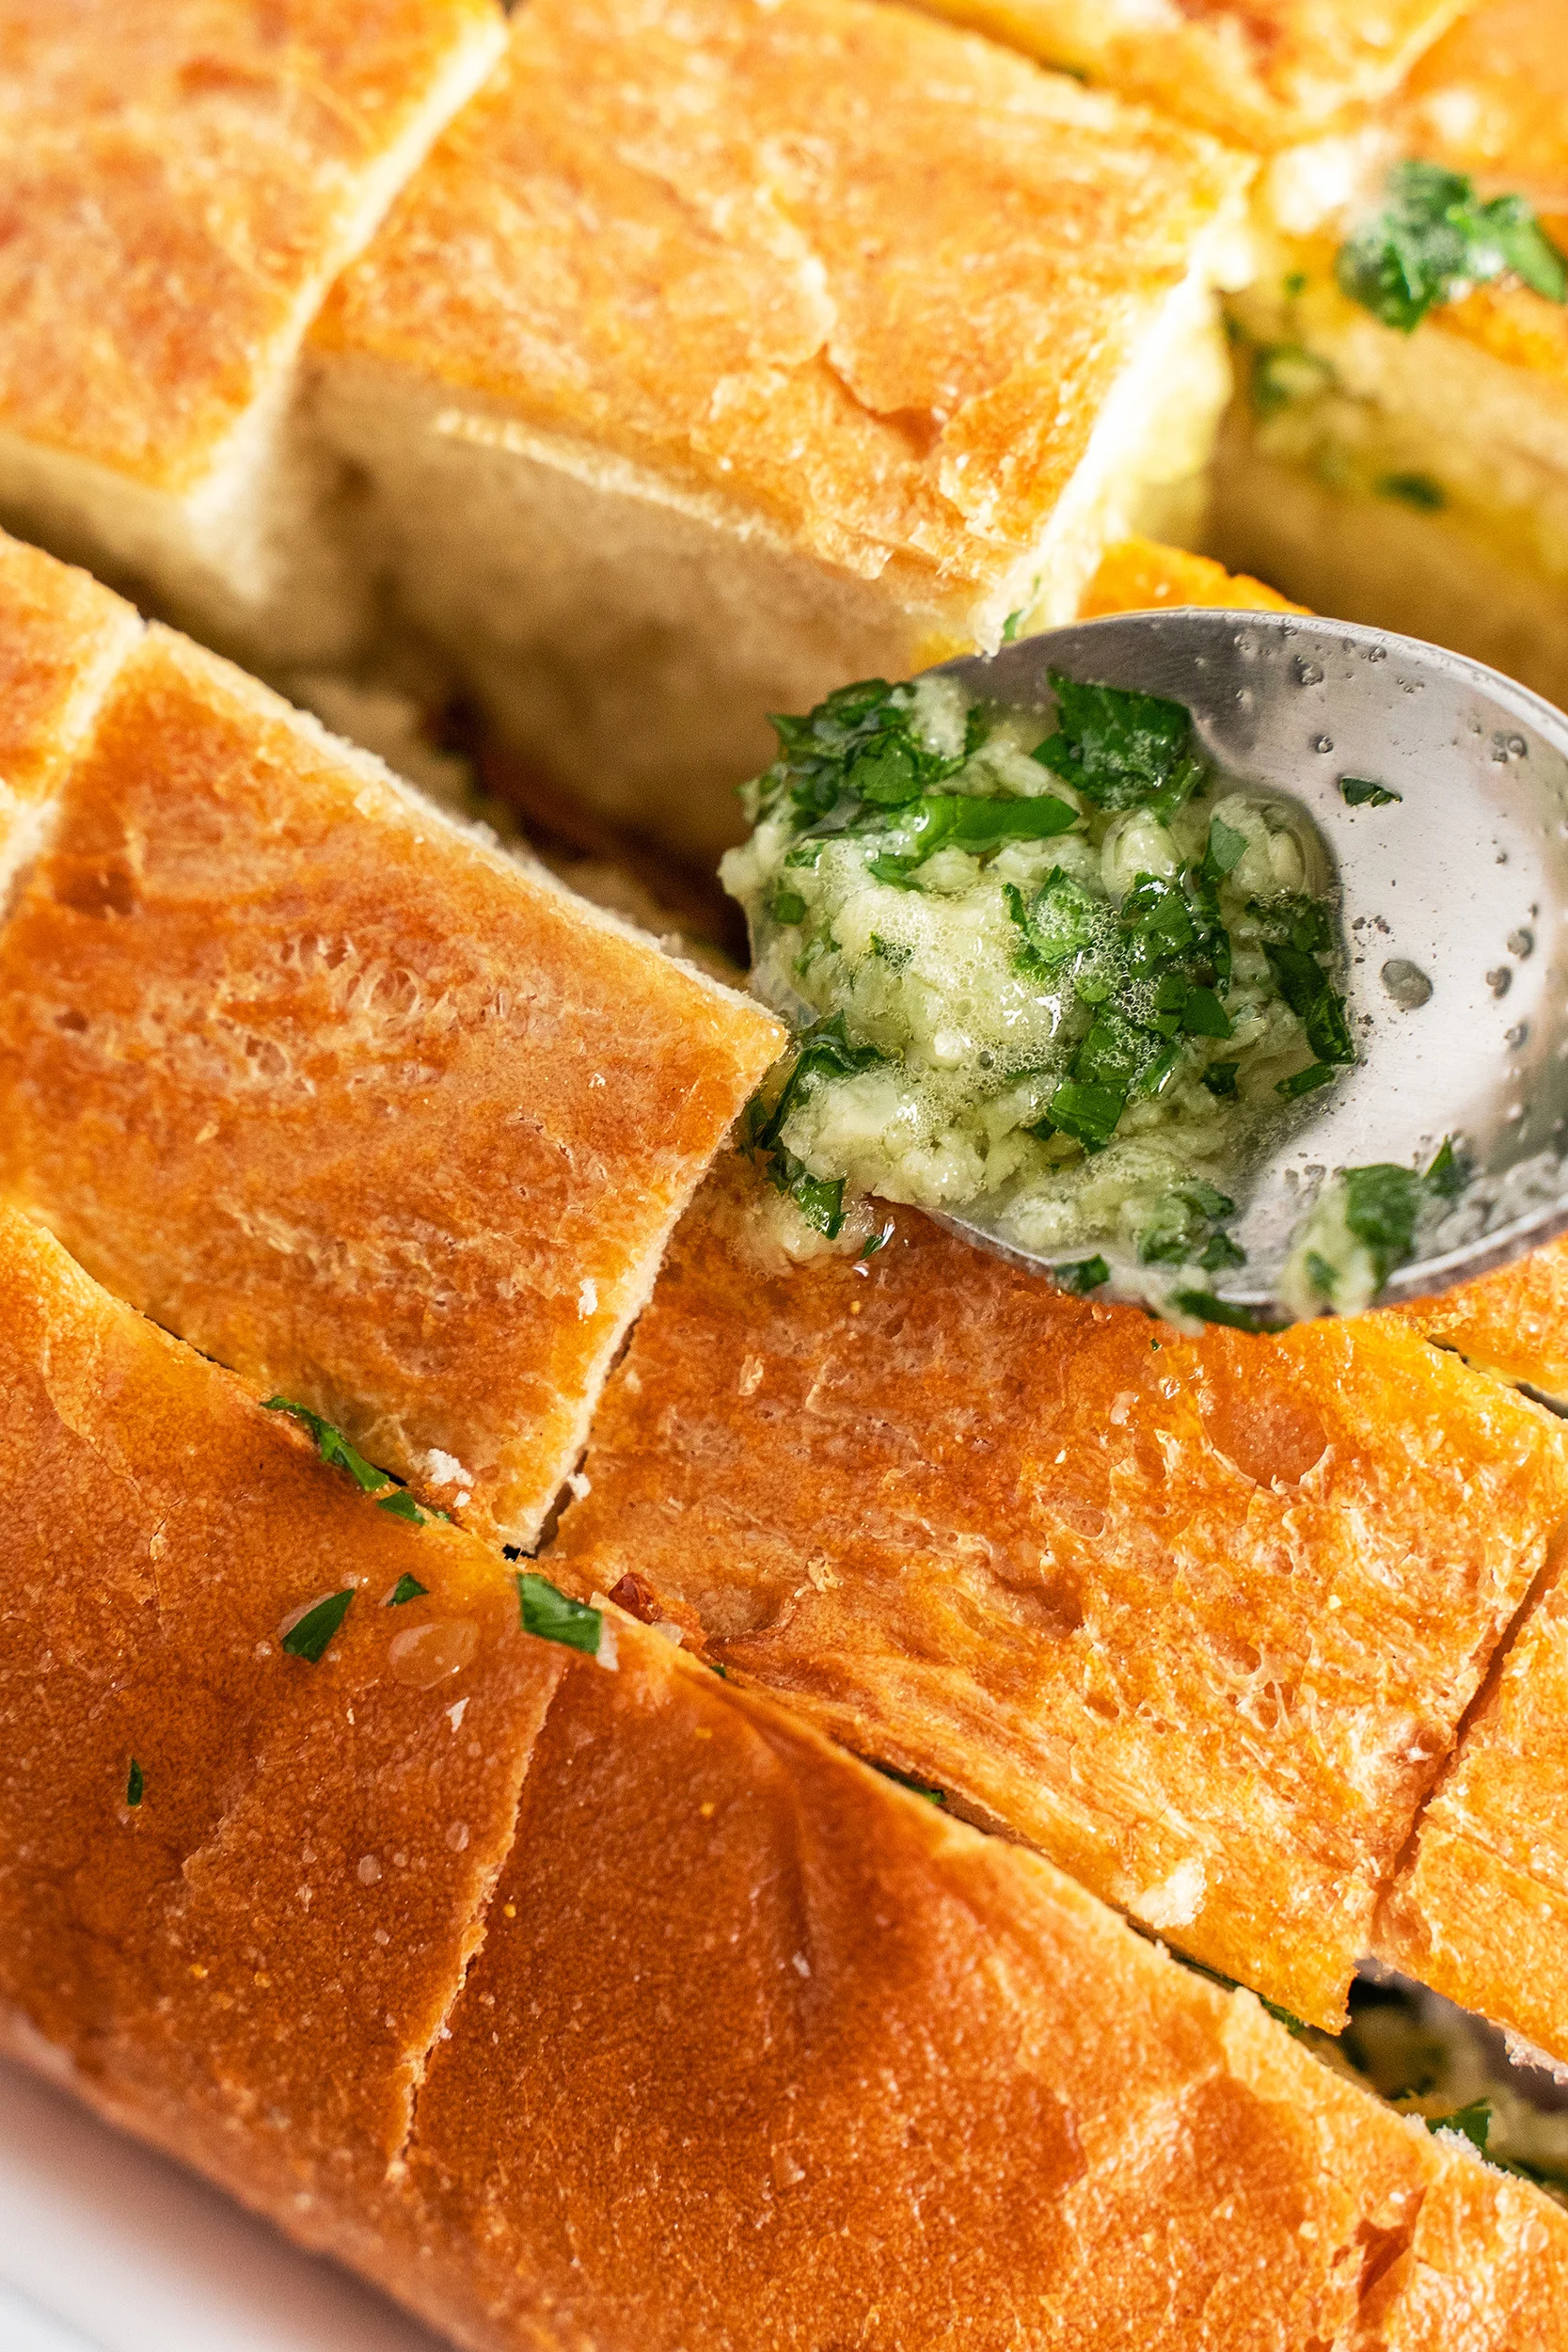 garlic, parsley, and melted butter mixture being spooned in between the cut squares of a loaf of fresh bread